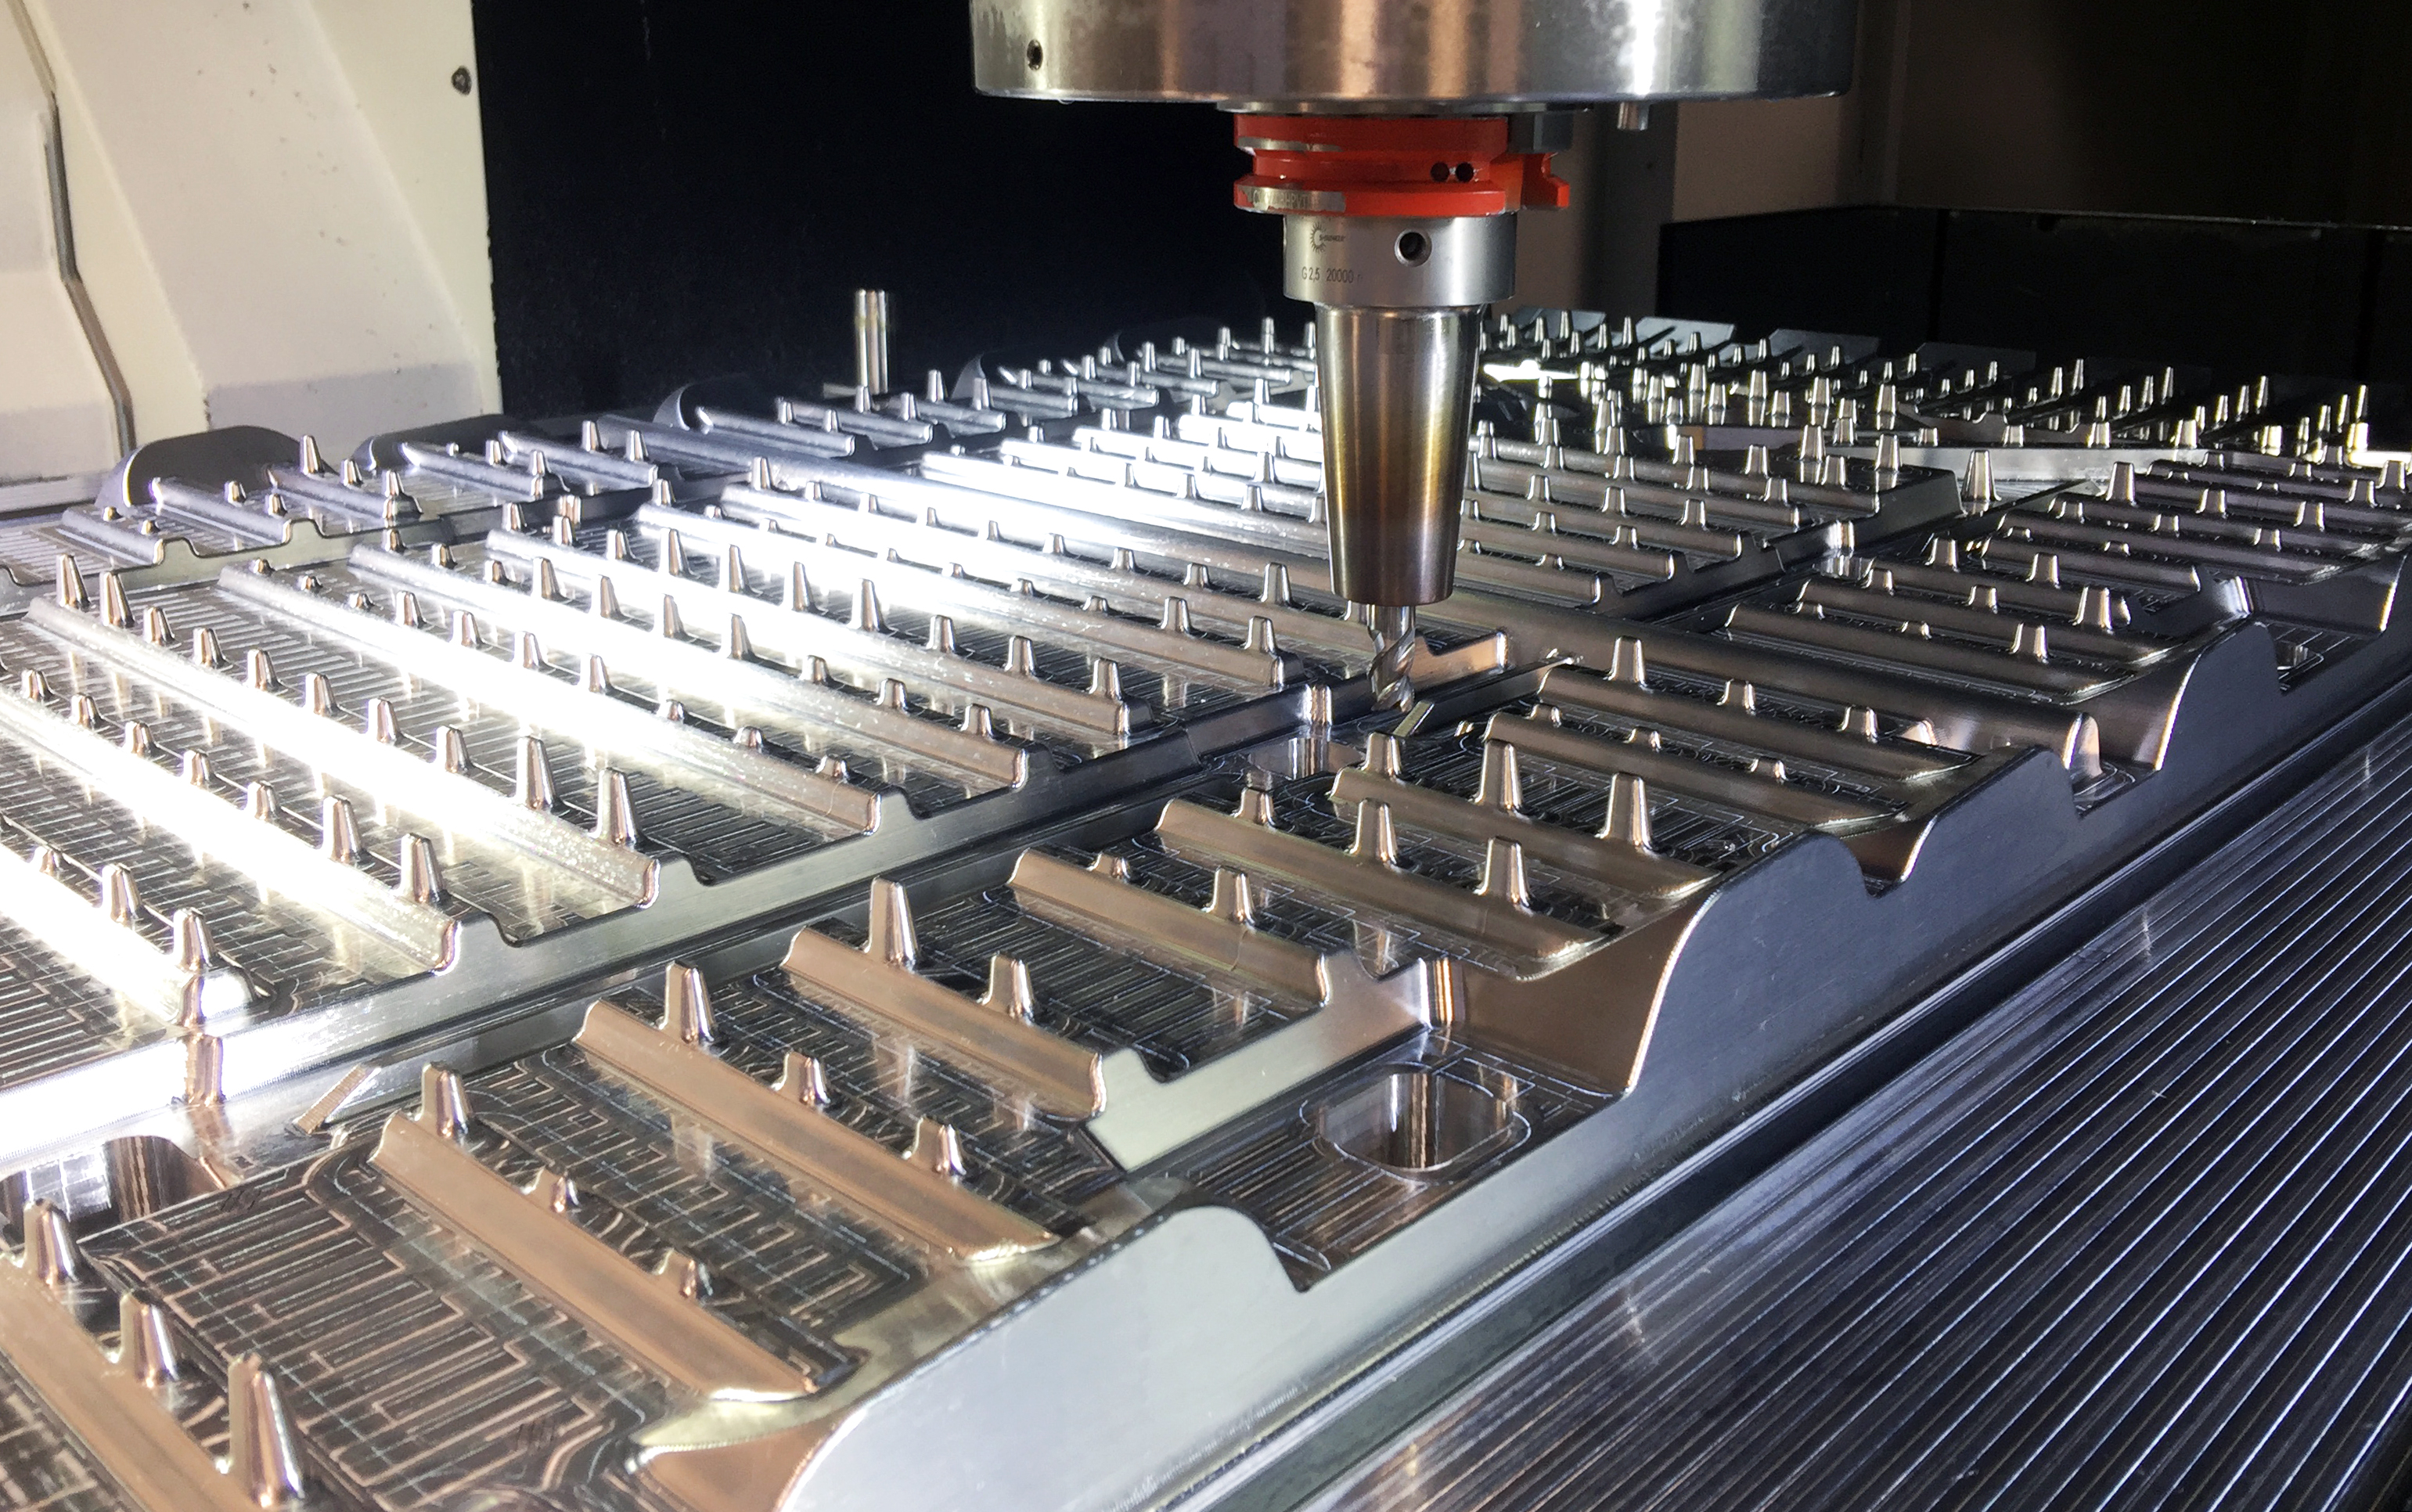 Combined with Lifetime’s new Mazak vertical machining center, OSG’s 3/8” 3-flute Blizzard end mill is able to reach its full potential, with parameters as high as 15,000 rpm and 220 ipm to generate unparalleled results in productivity.